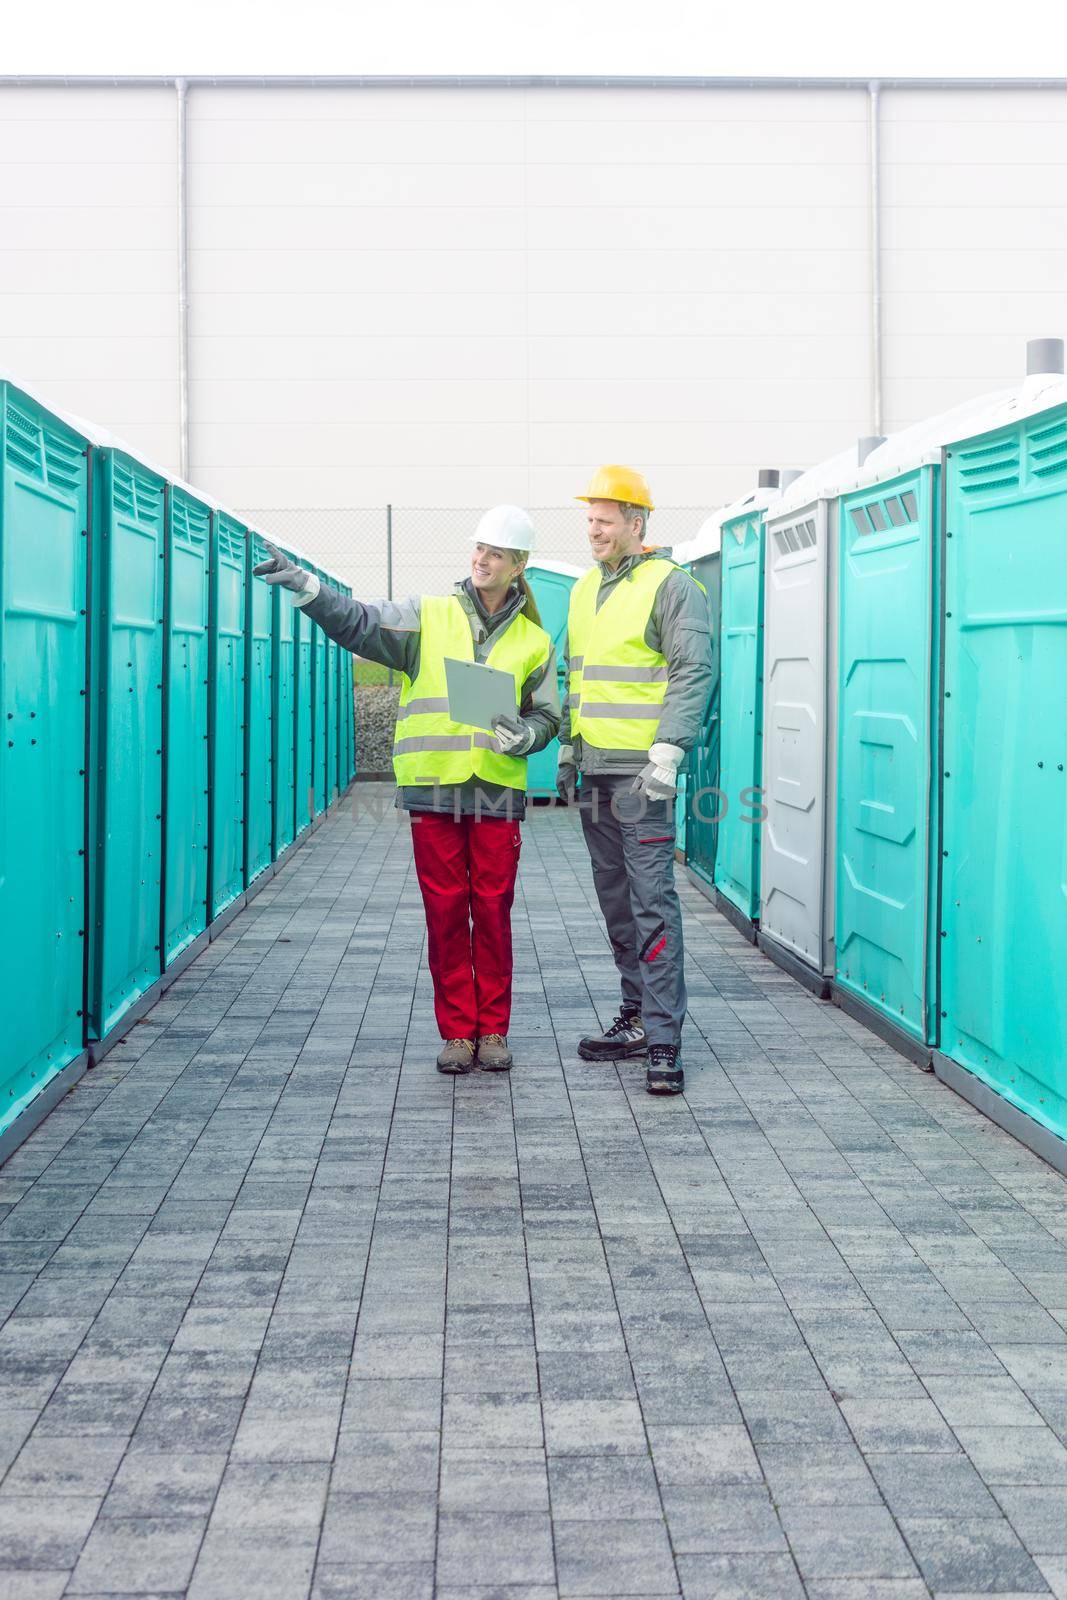 Workers checking the portable toilets for rental by Kzenon